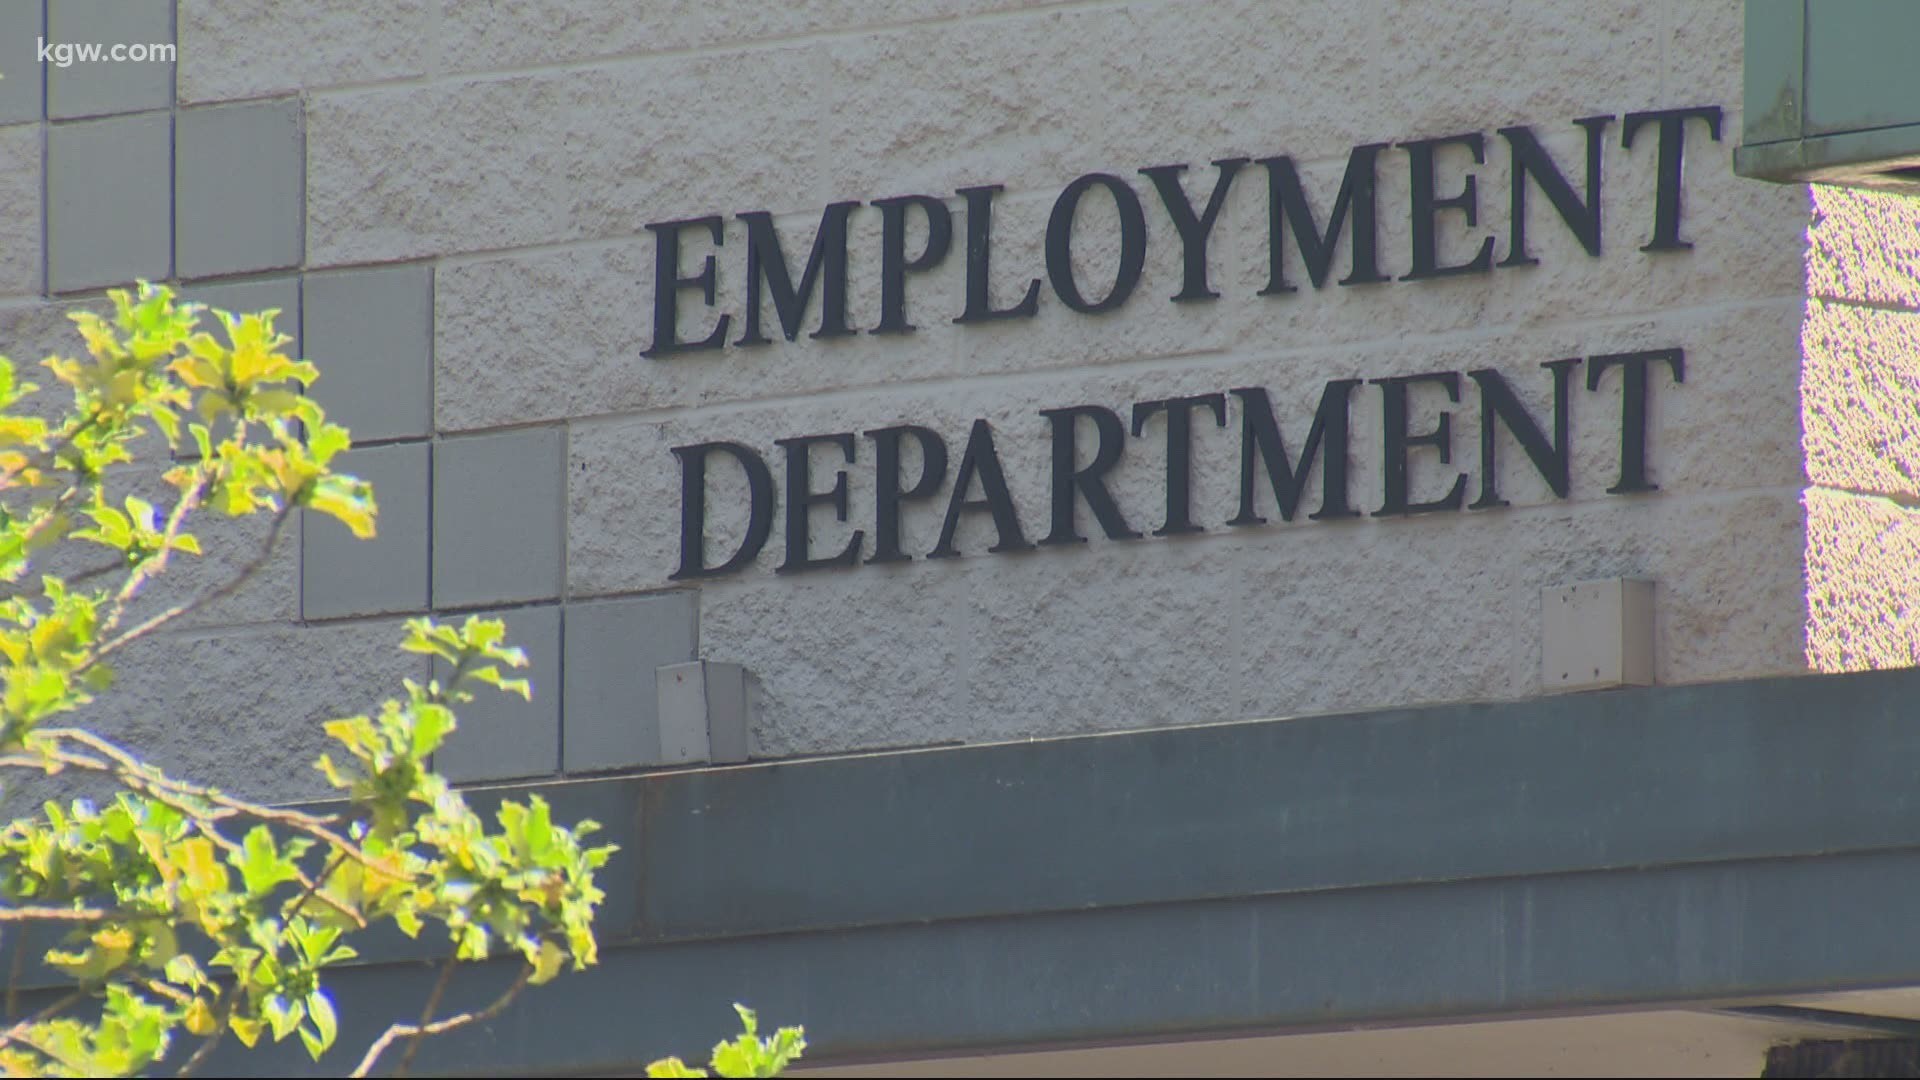 An Oregon Employment Department worker says workers were wasting time on their phones while they could have worked on the state’s unemployment claims.